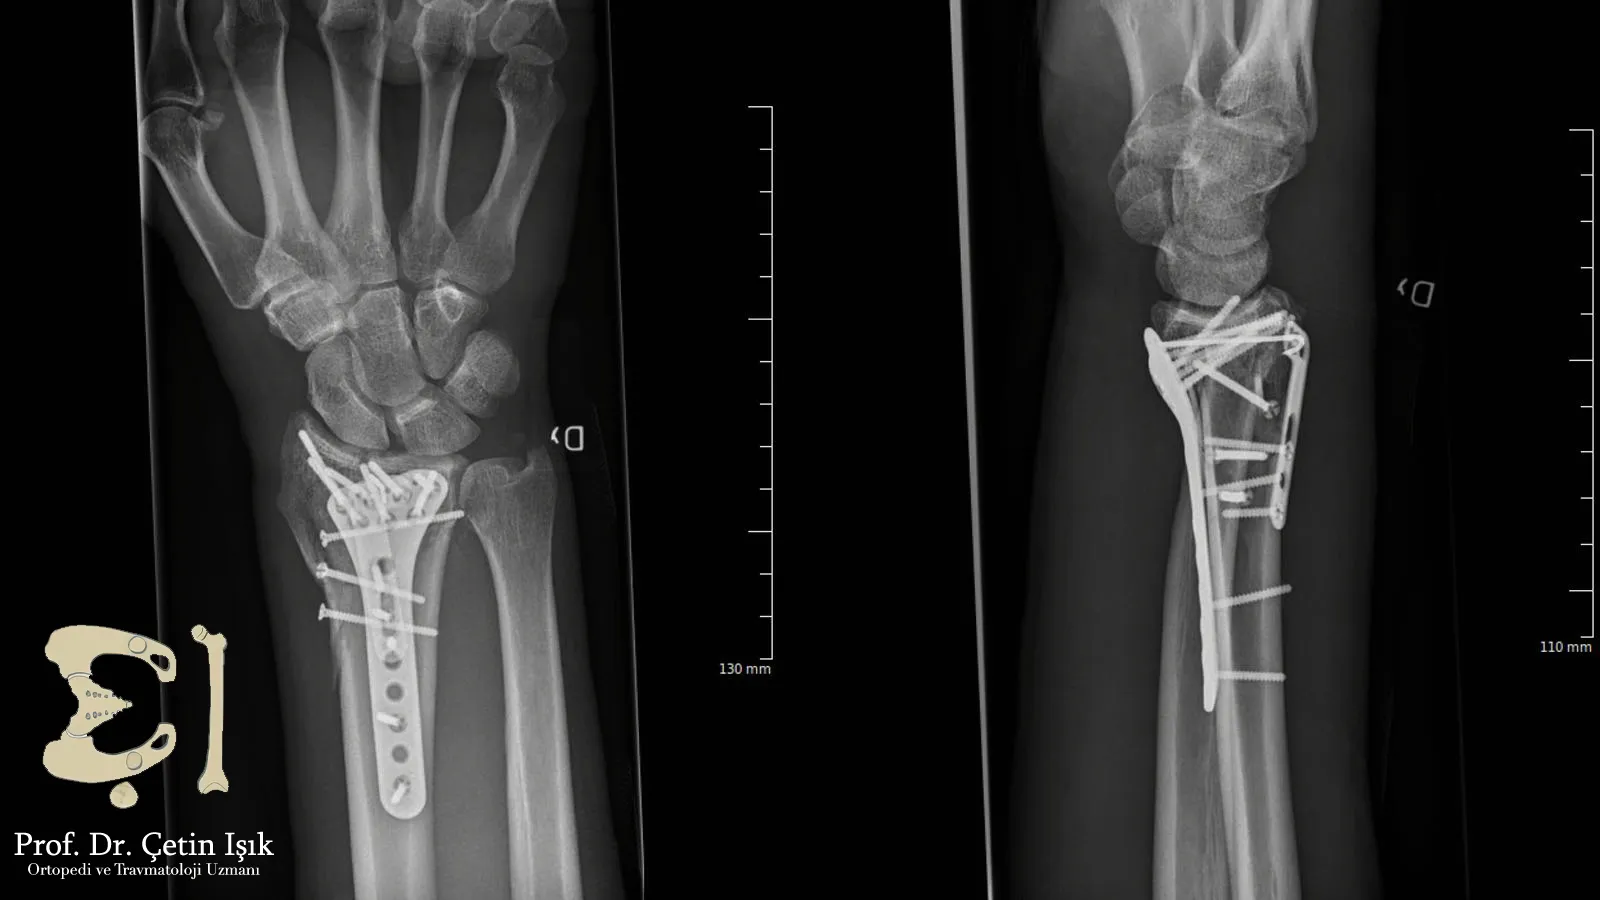 Anterior and lateral radiograph showing plates placed on the lower end of the radial bone and secured with screws (internal fixation surgery)